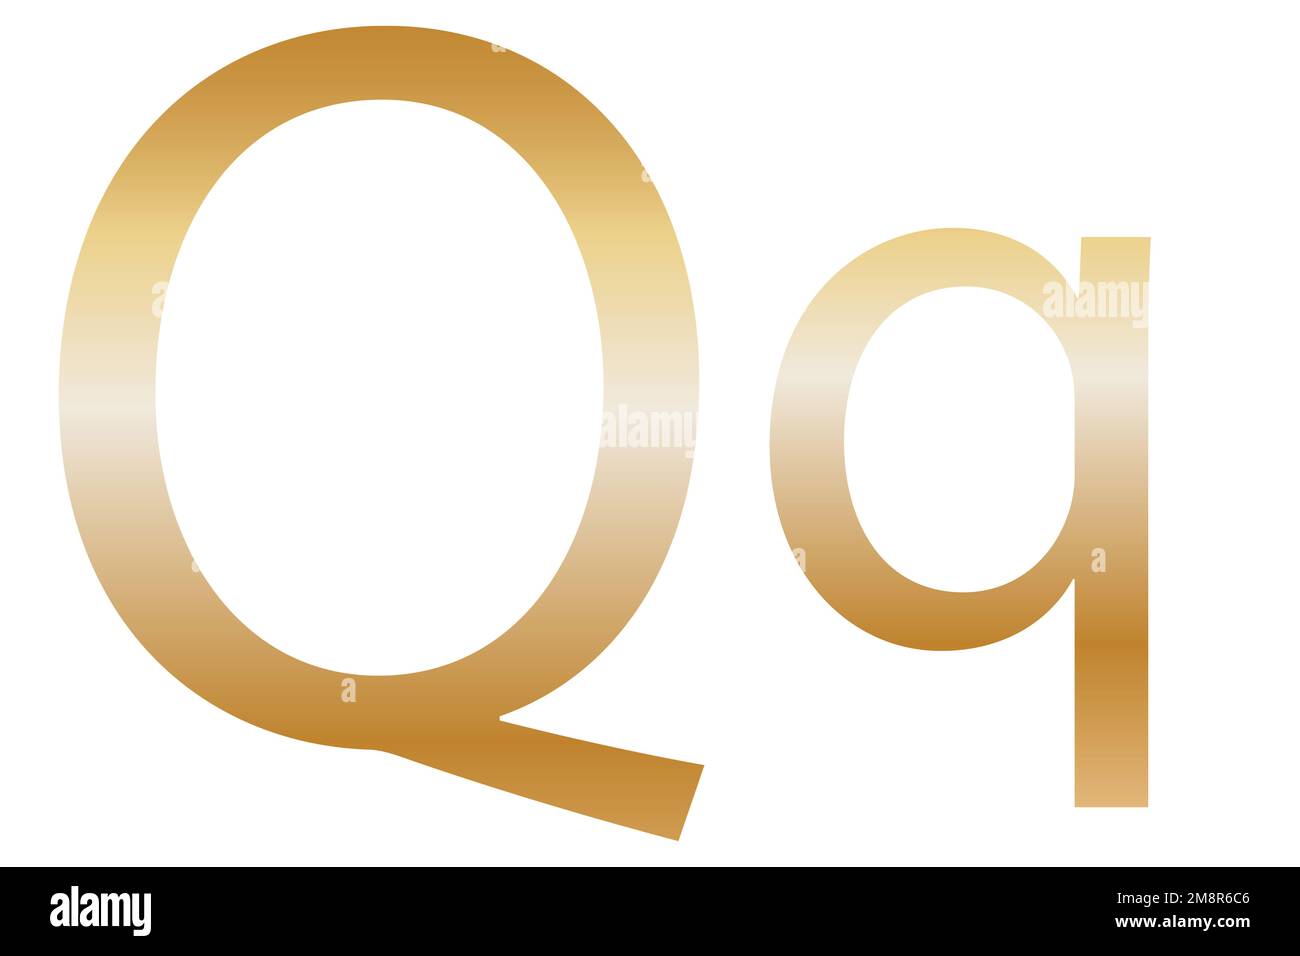 Letter Q. Golden color with a gradient. Classic font. Isolated on a white background. Stock Photo